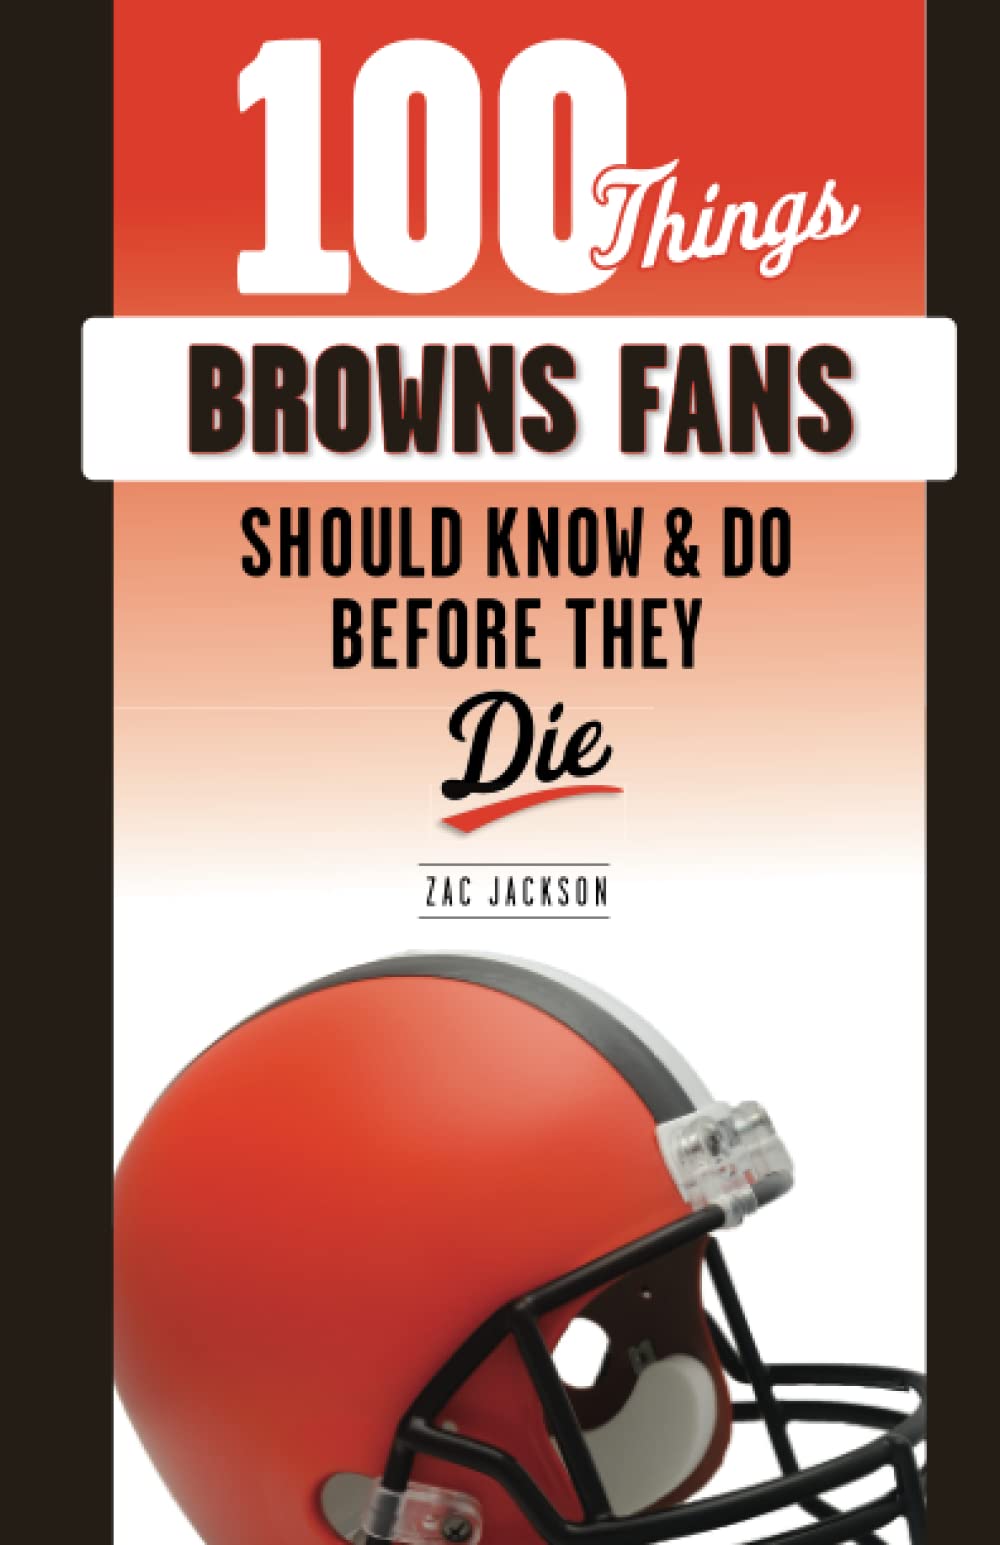 100 Things Browns Fans Should Know & Do Before They Die - SureShot Books Publishing LLC